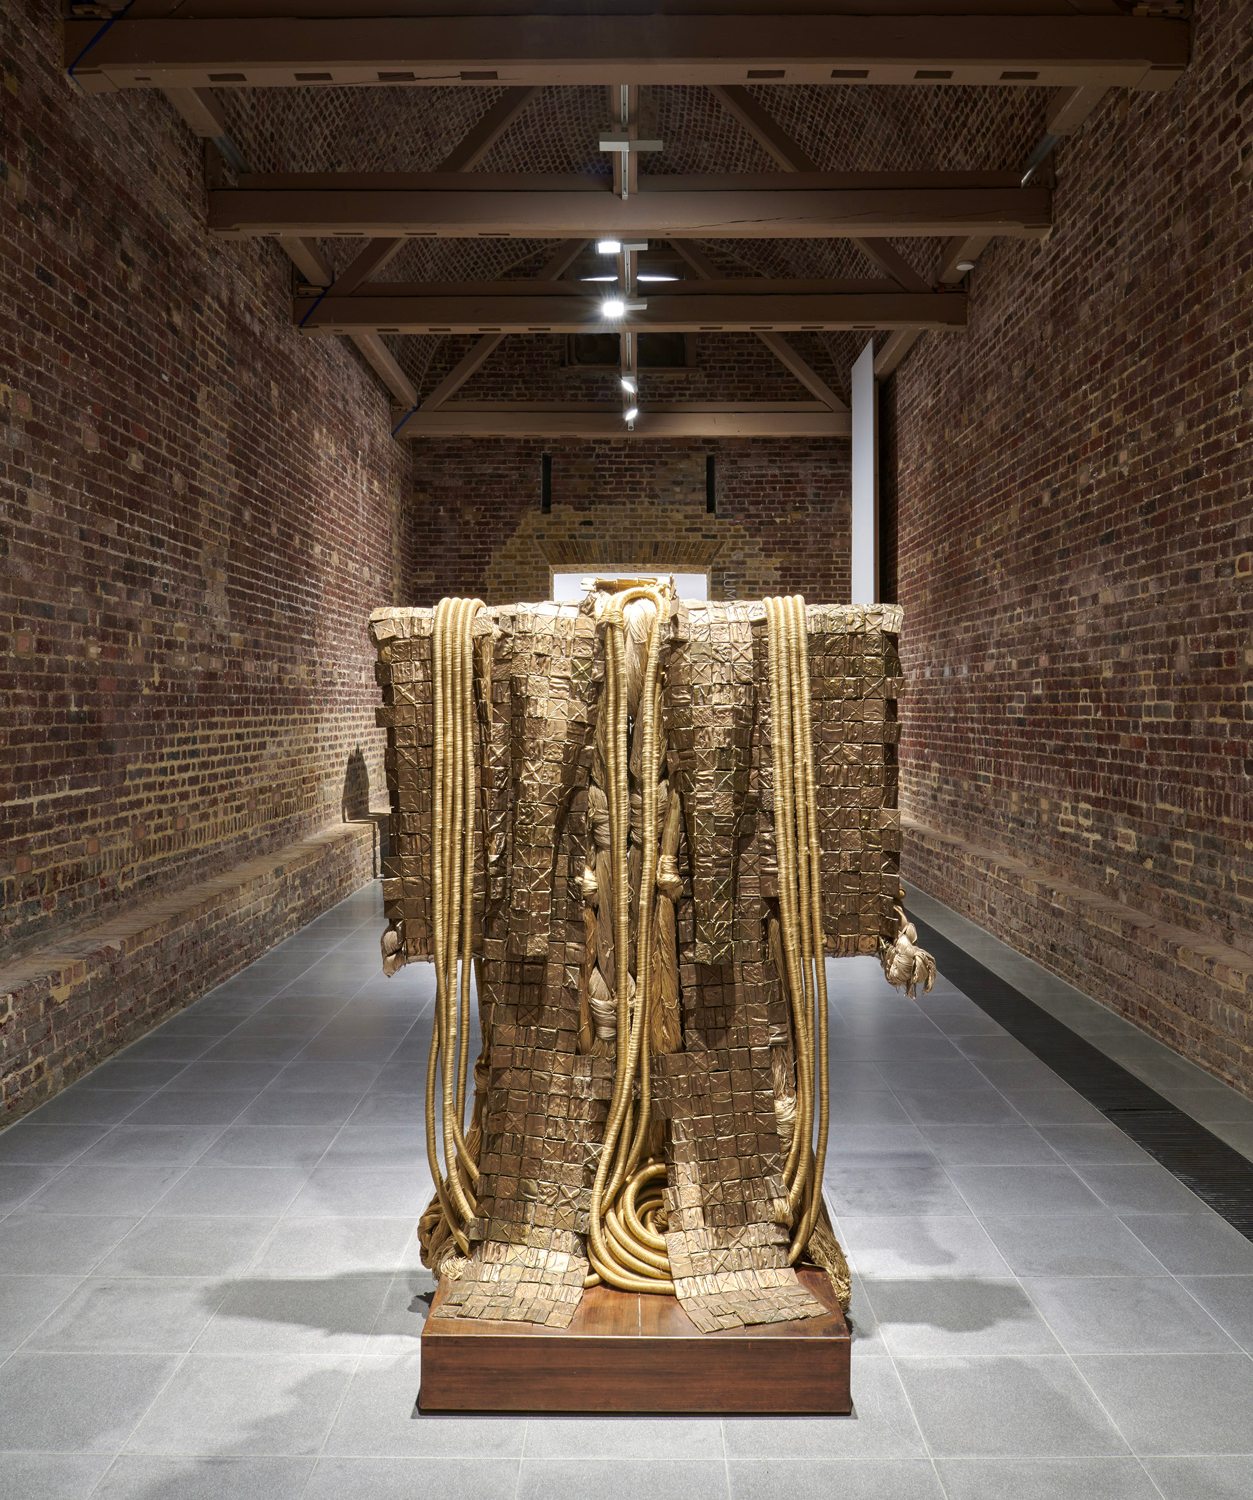 Installation view of Barbara Chase-Riboud’s exhibition ‘Infinite Folds’ at Serpentine North, London, 2022. Photographs by Jo Underhill. Courtesy of the artist and Serpentine.